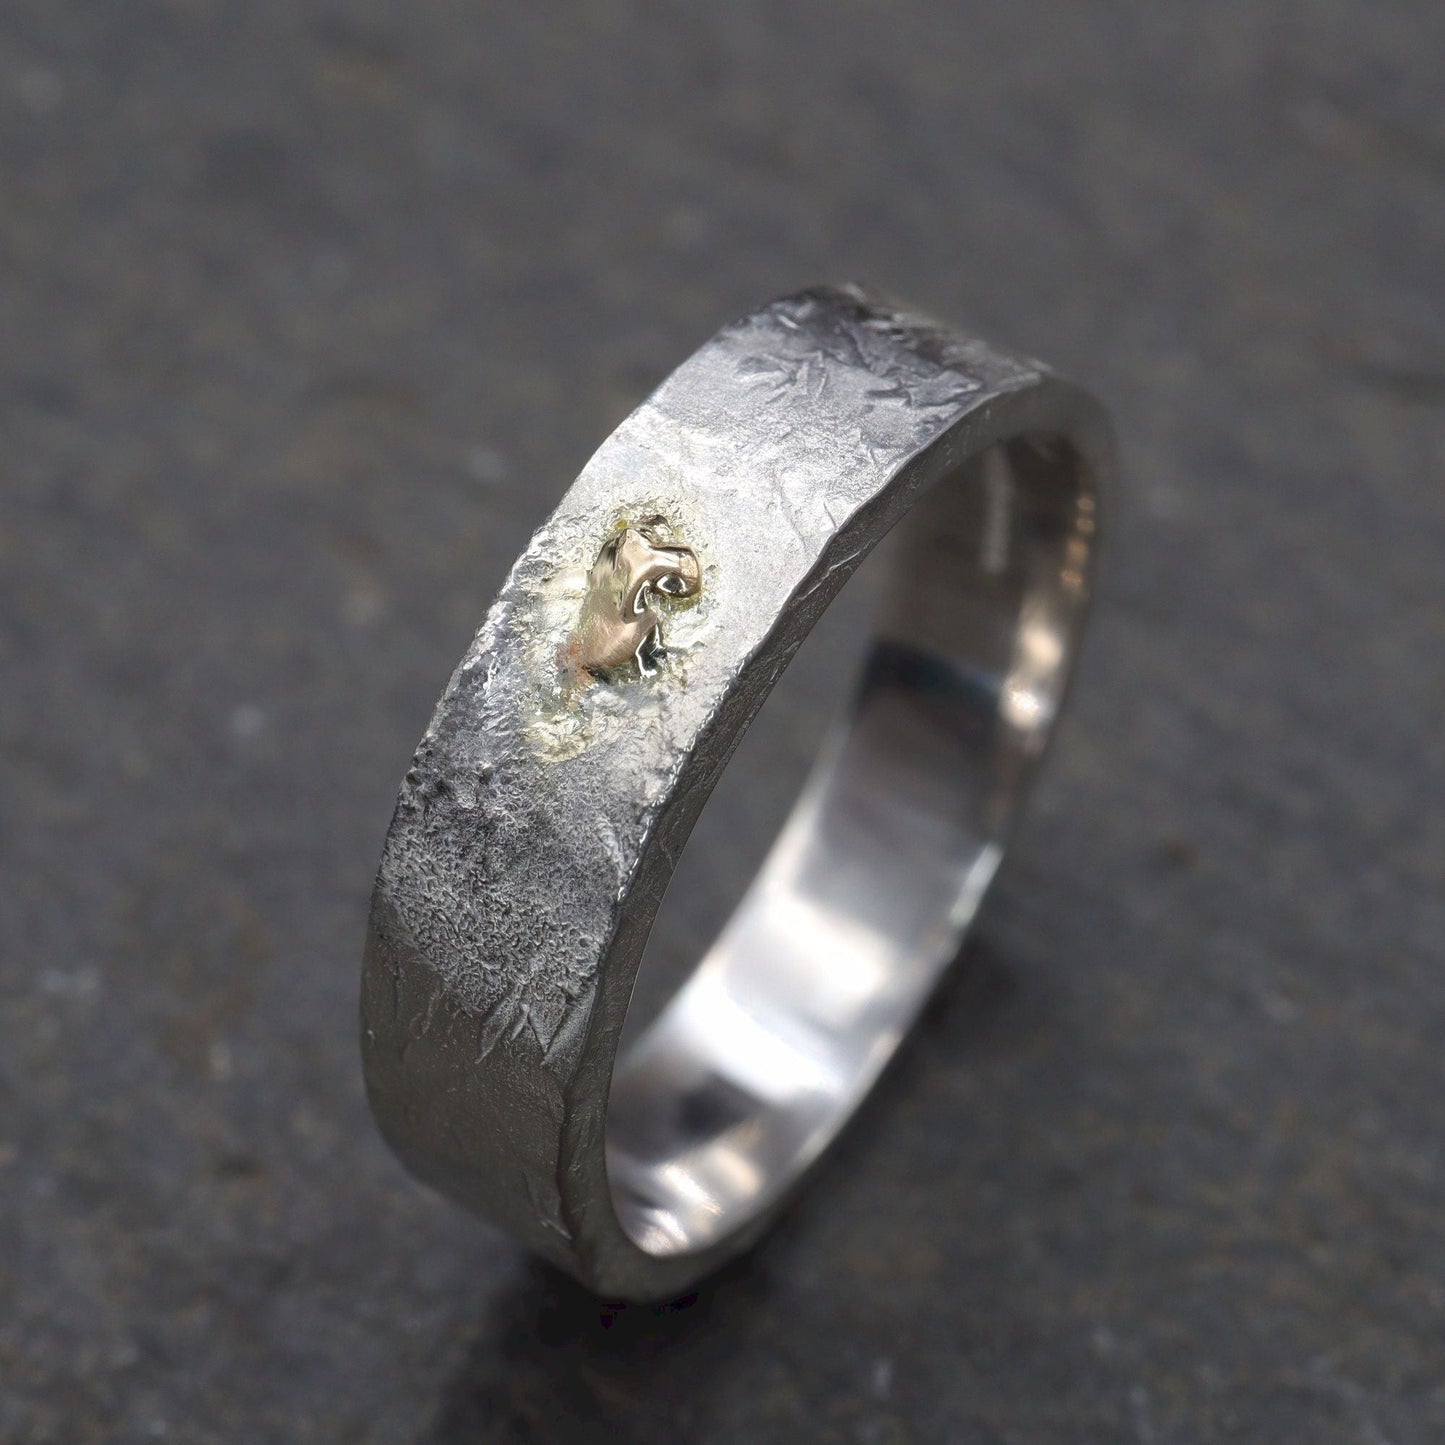 Silver and gold mens engagement ring - hammered textured band - Windermere Sunspot design.